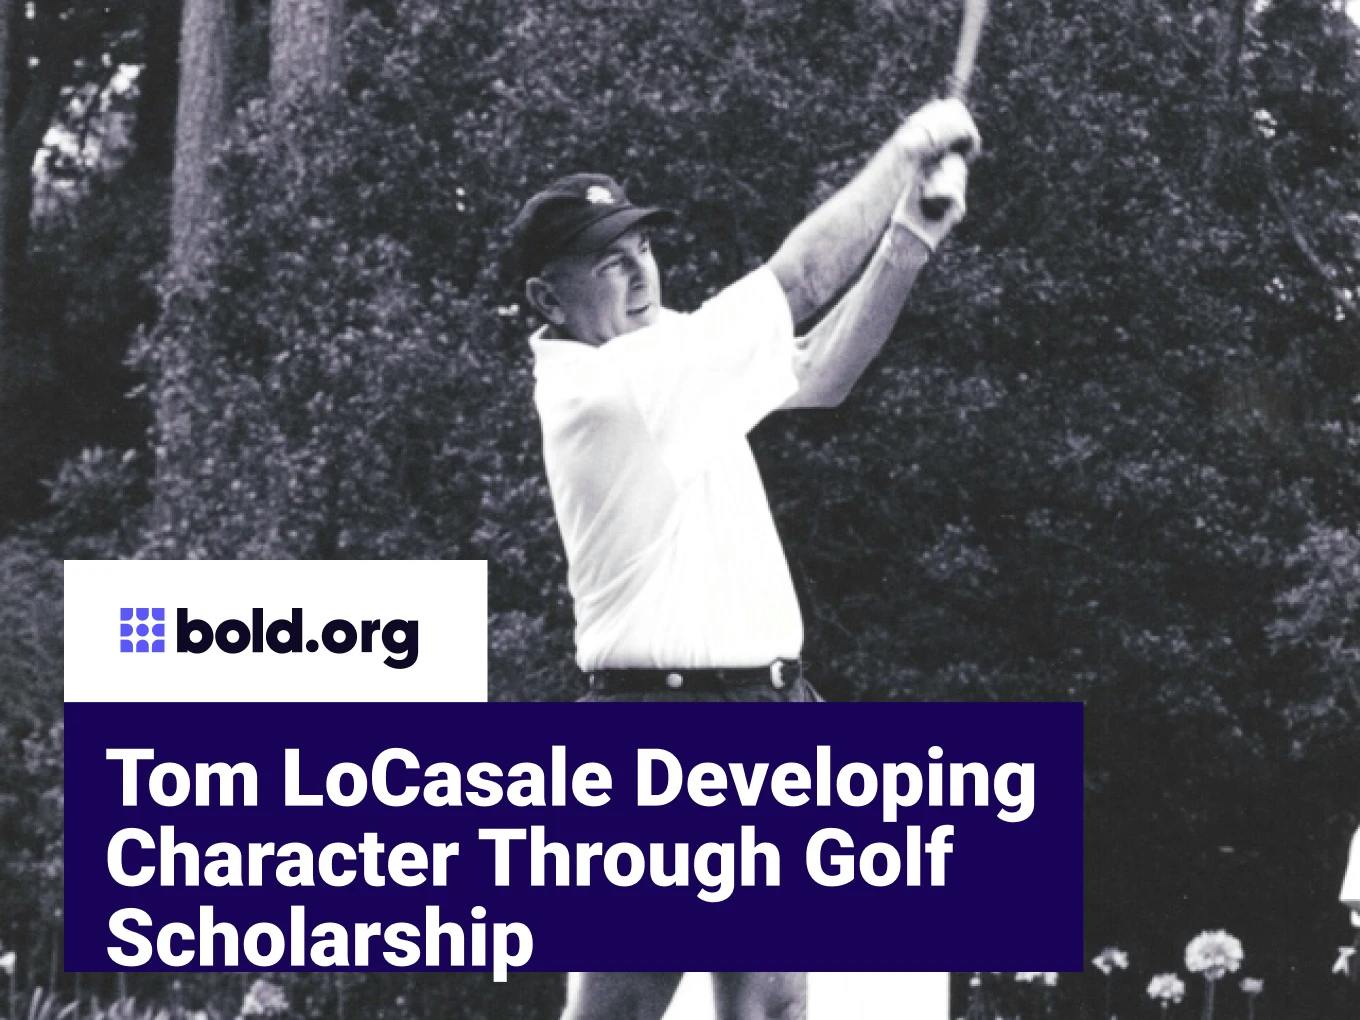 Tom LoCasale Developing Character Through Golf Scholarship